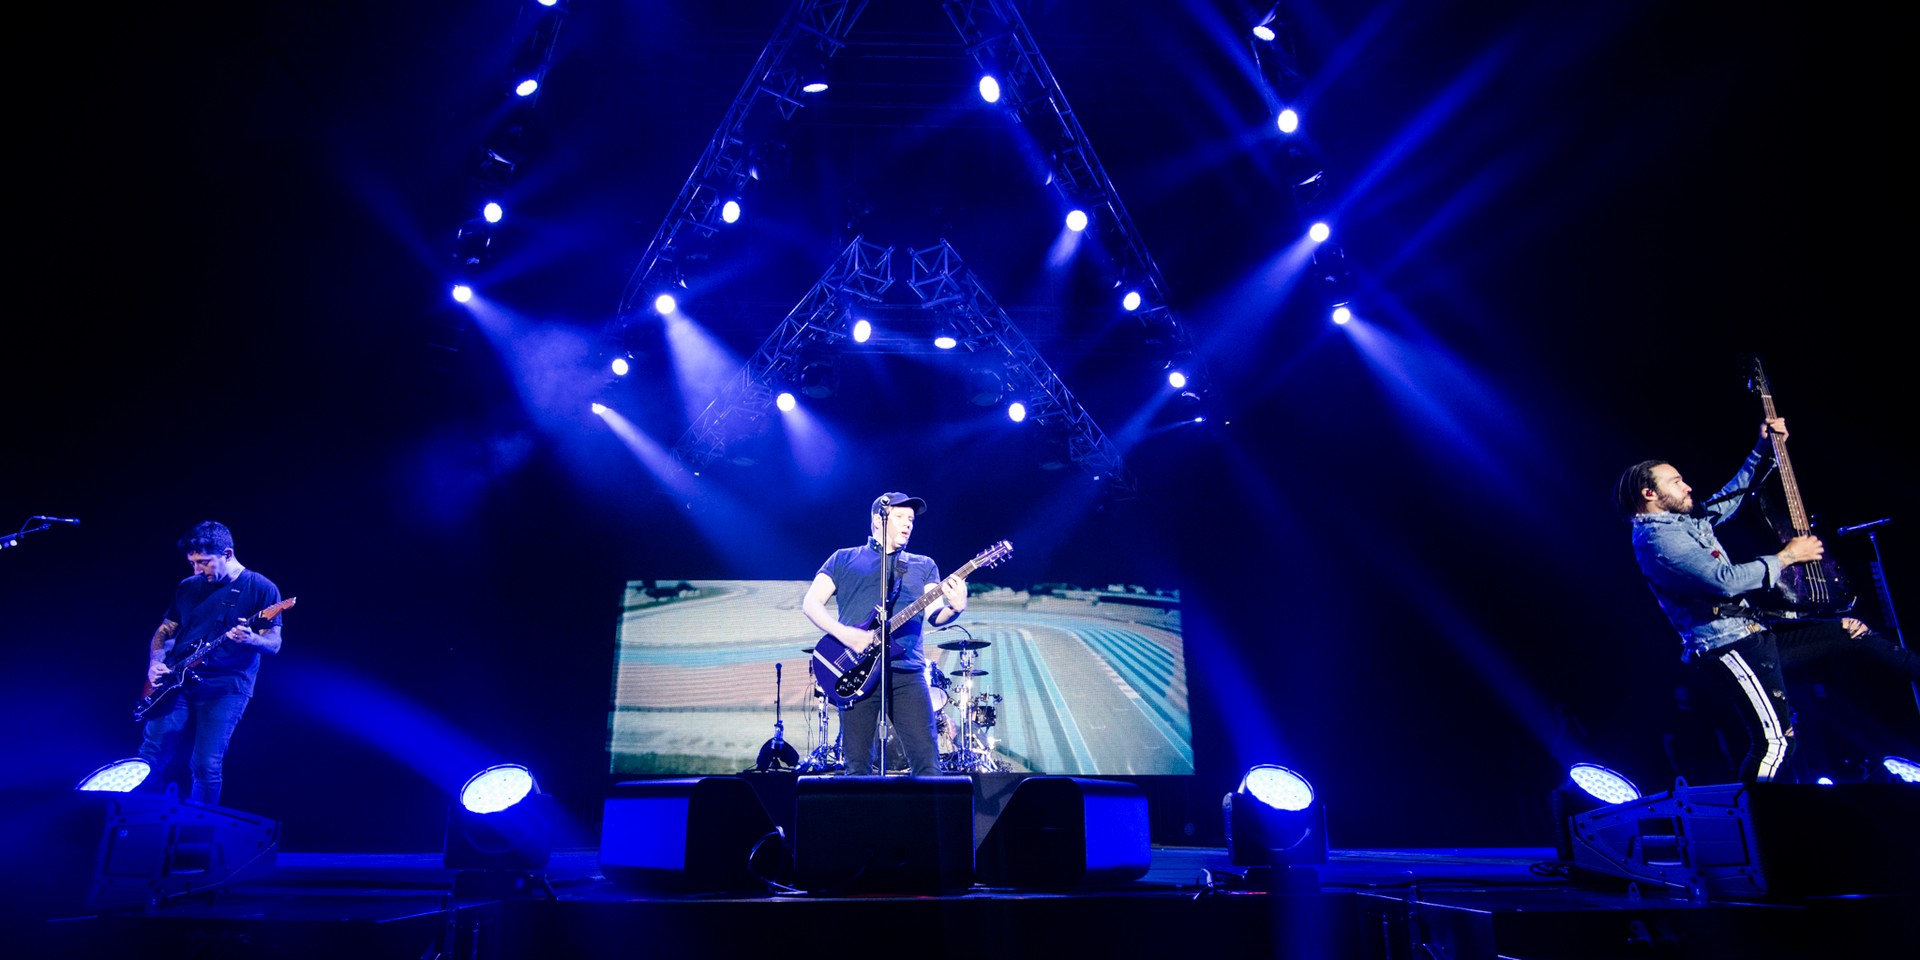 This ain’t a scene, it’s Fall Out Boy’s unforgettable Singapore show – gig report